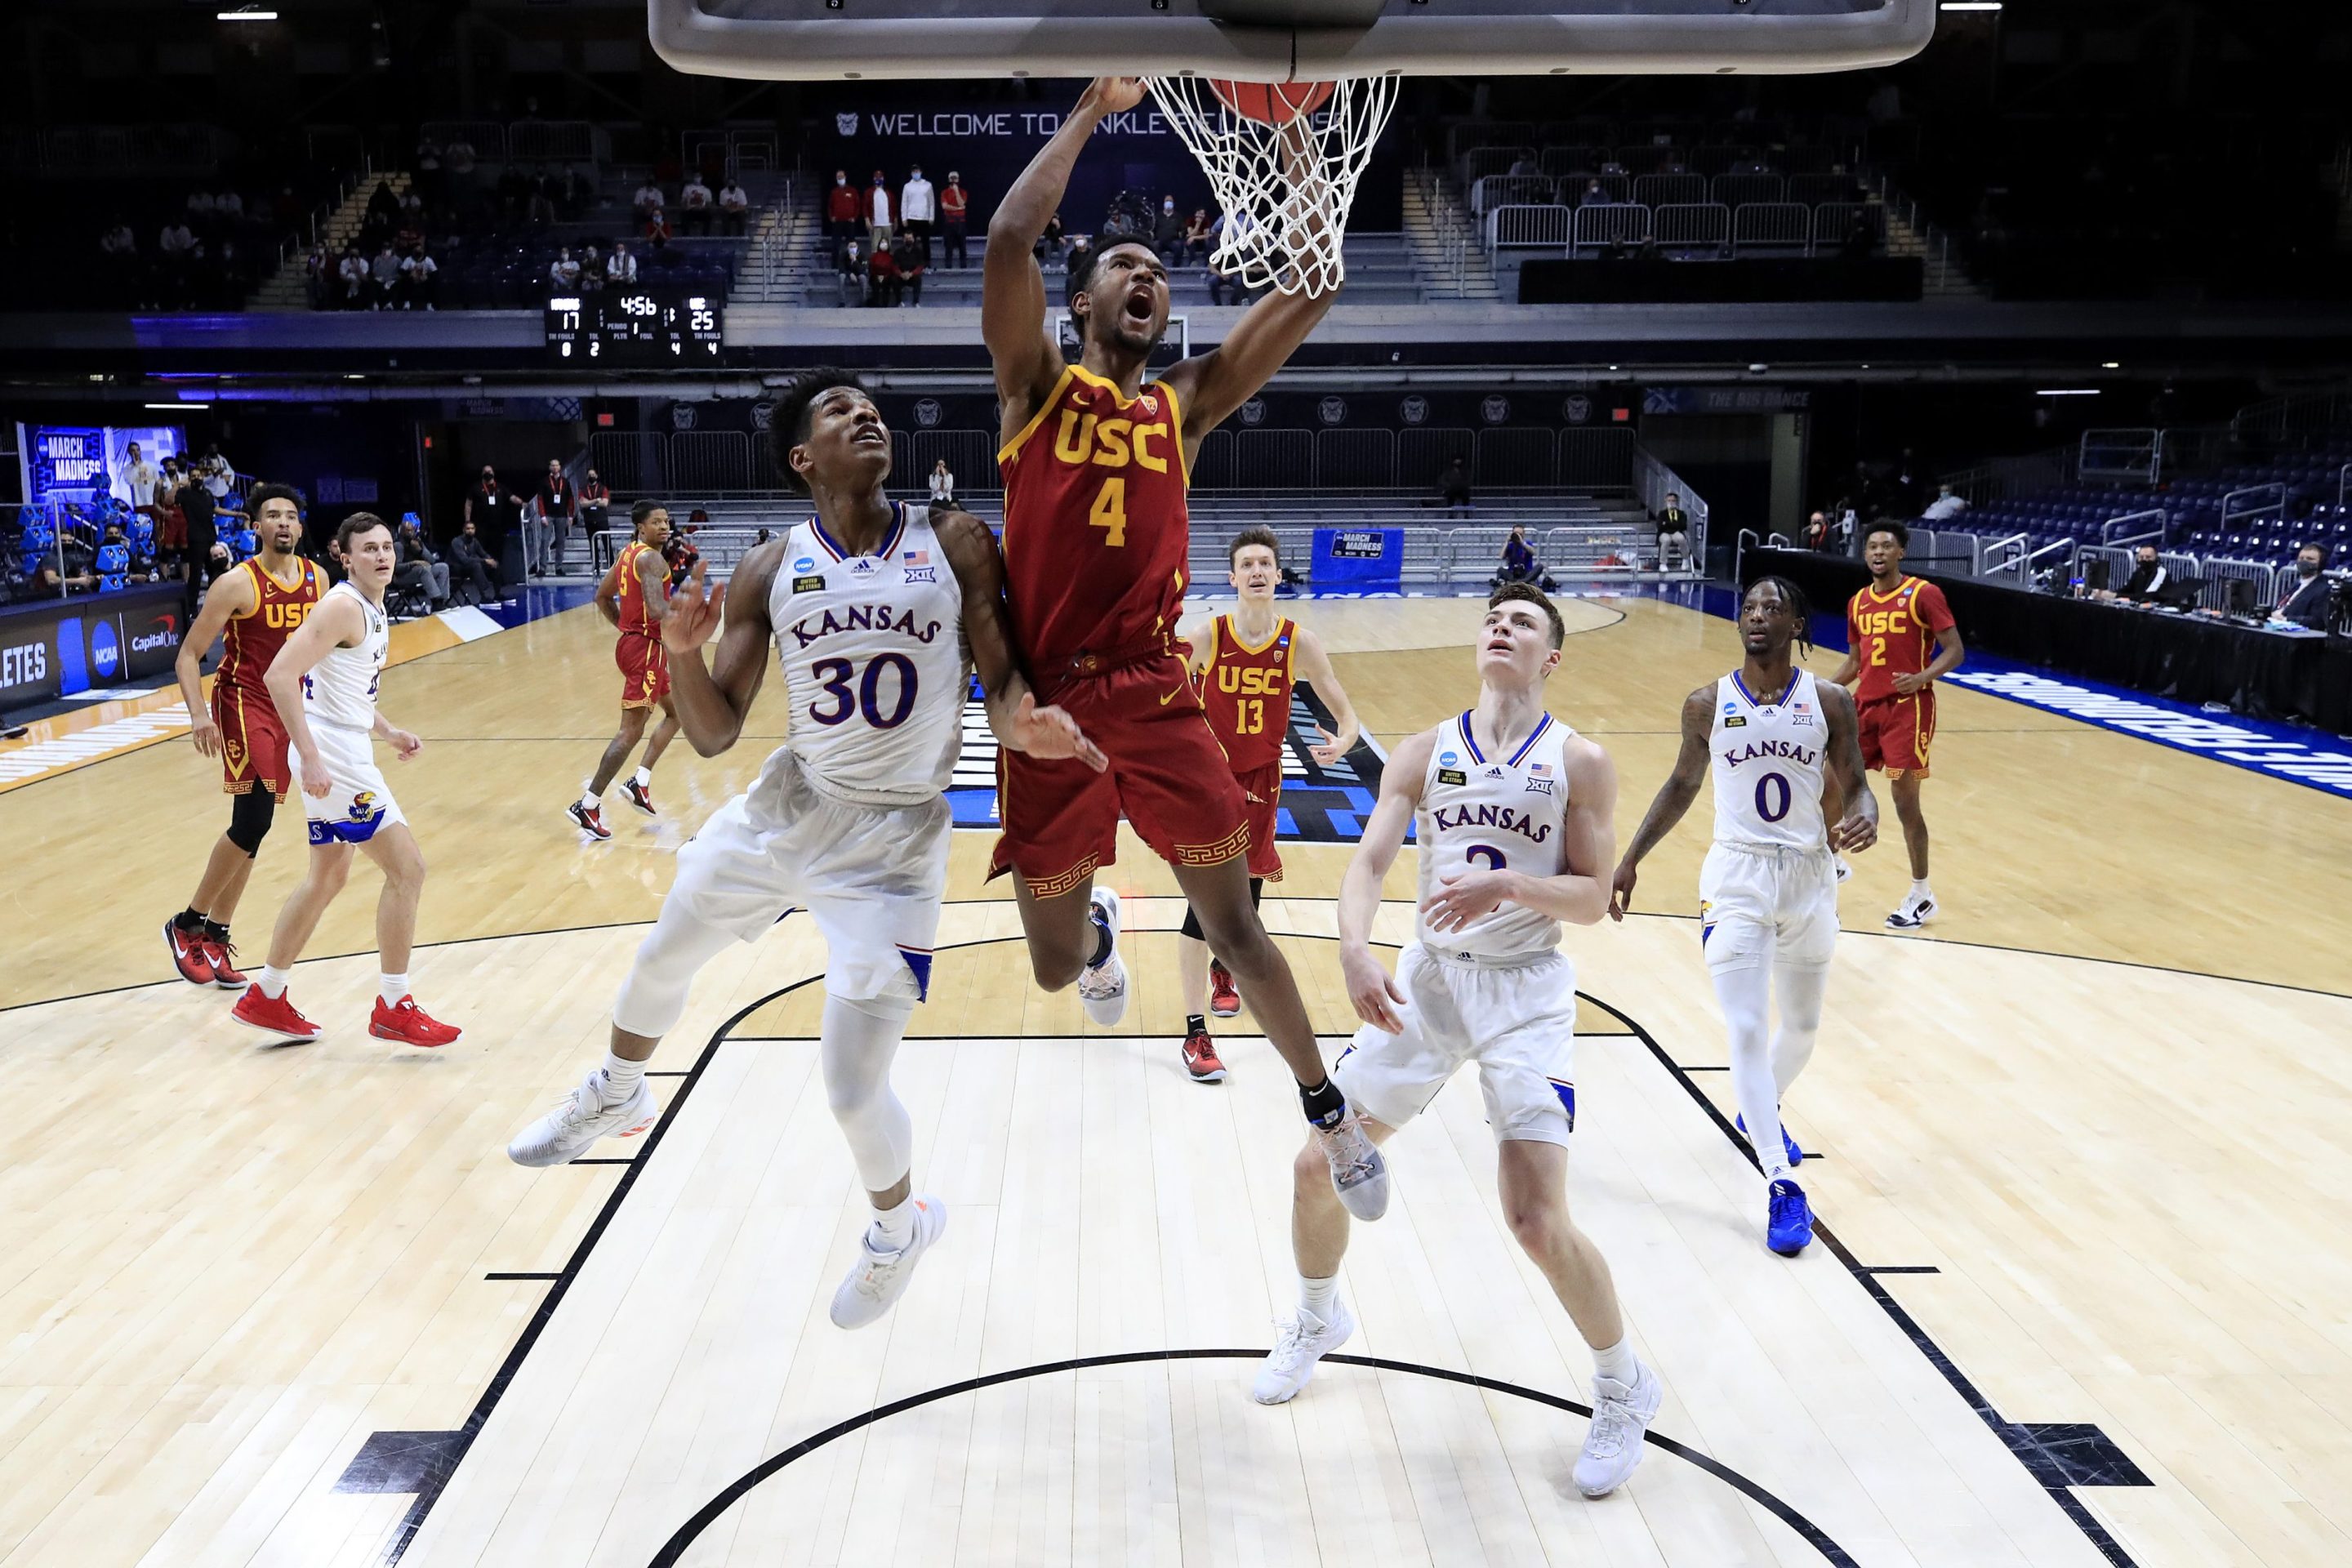 Evan Mobley of the USC Trojans dunks the ball